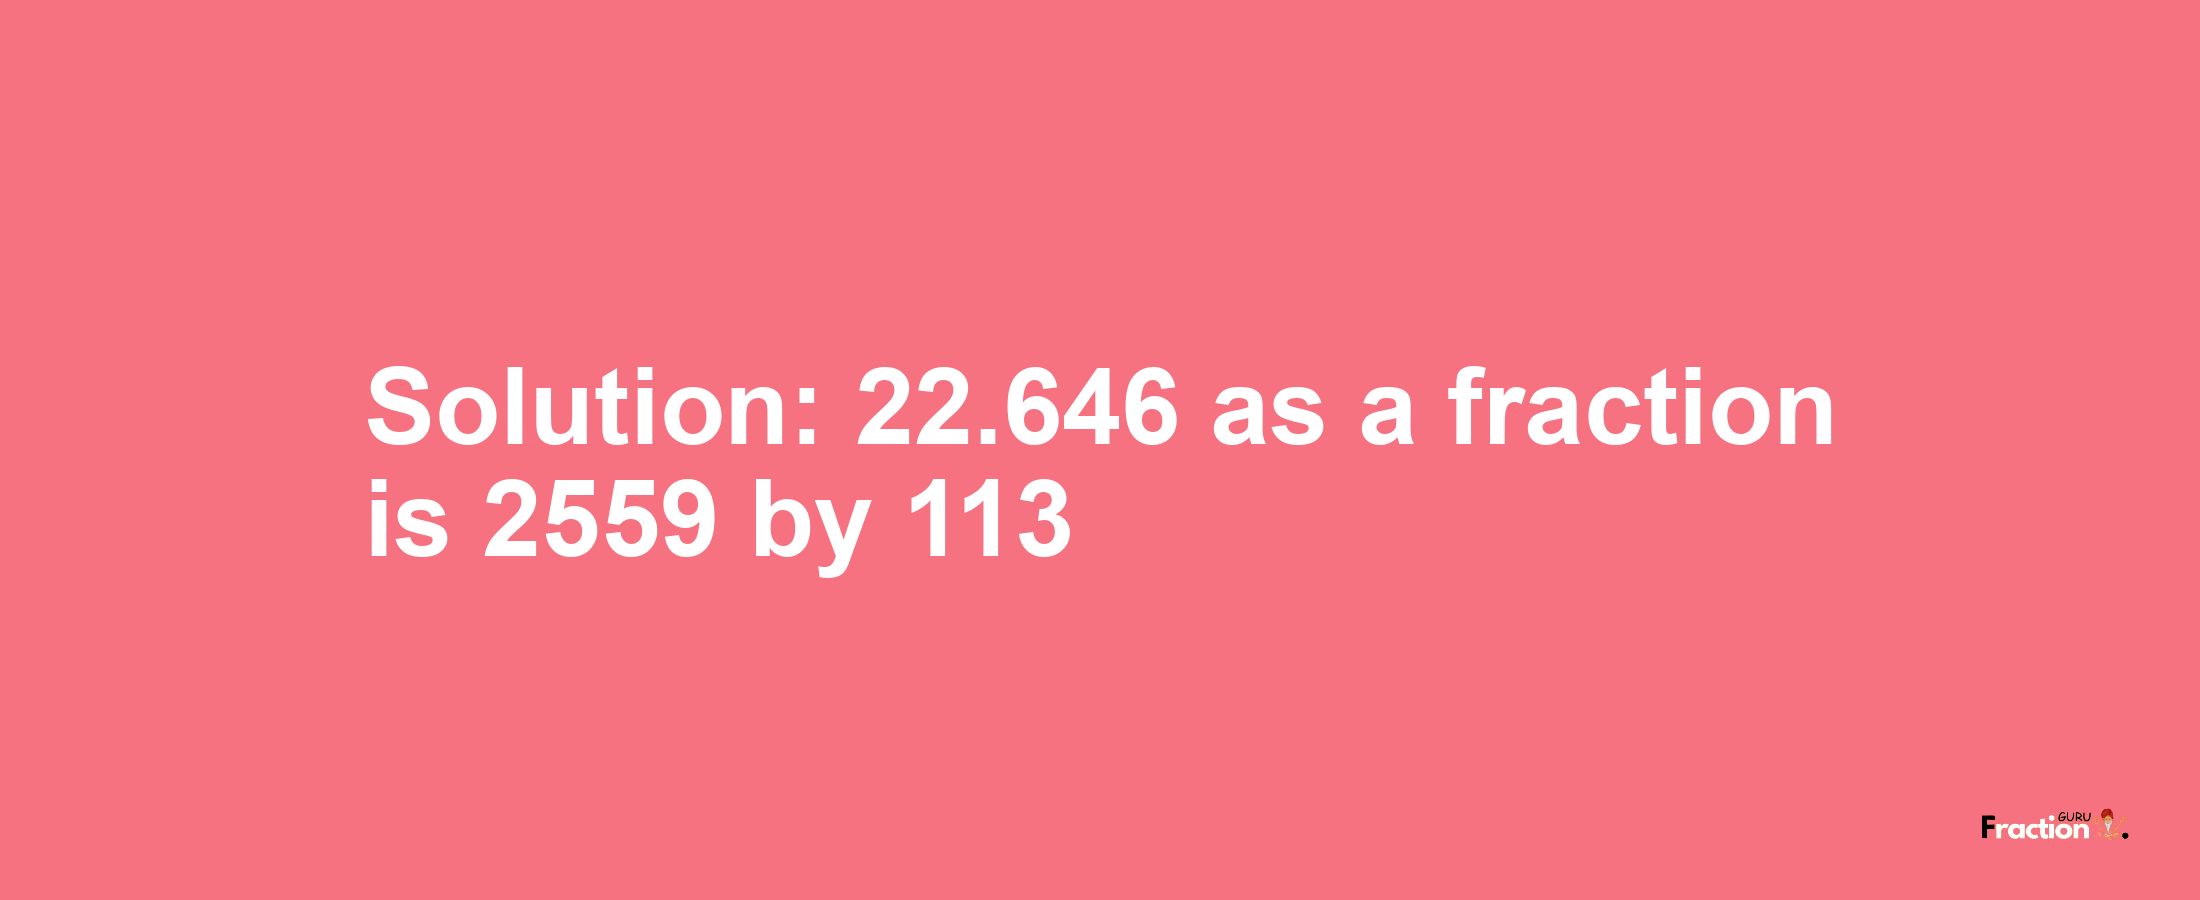 Solution:22.646 as a fraction is 2559/113